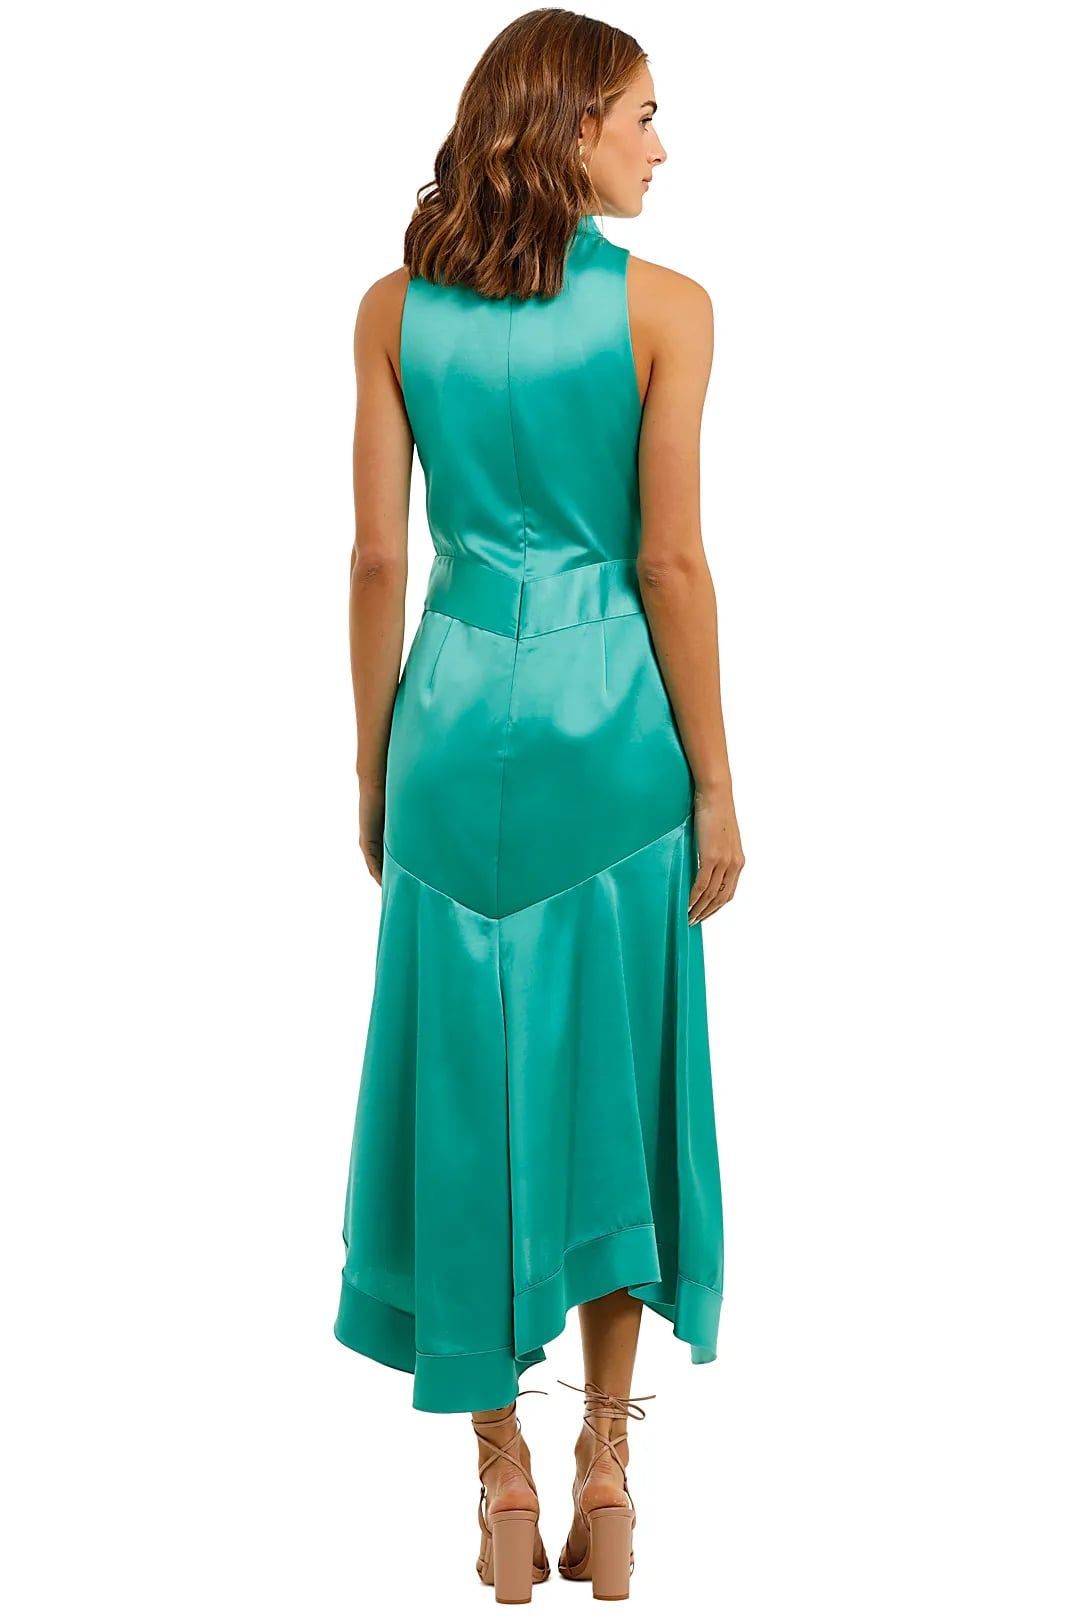 Millbank dress in green for spring events.